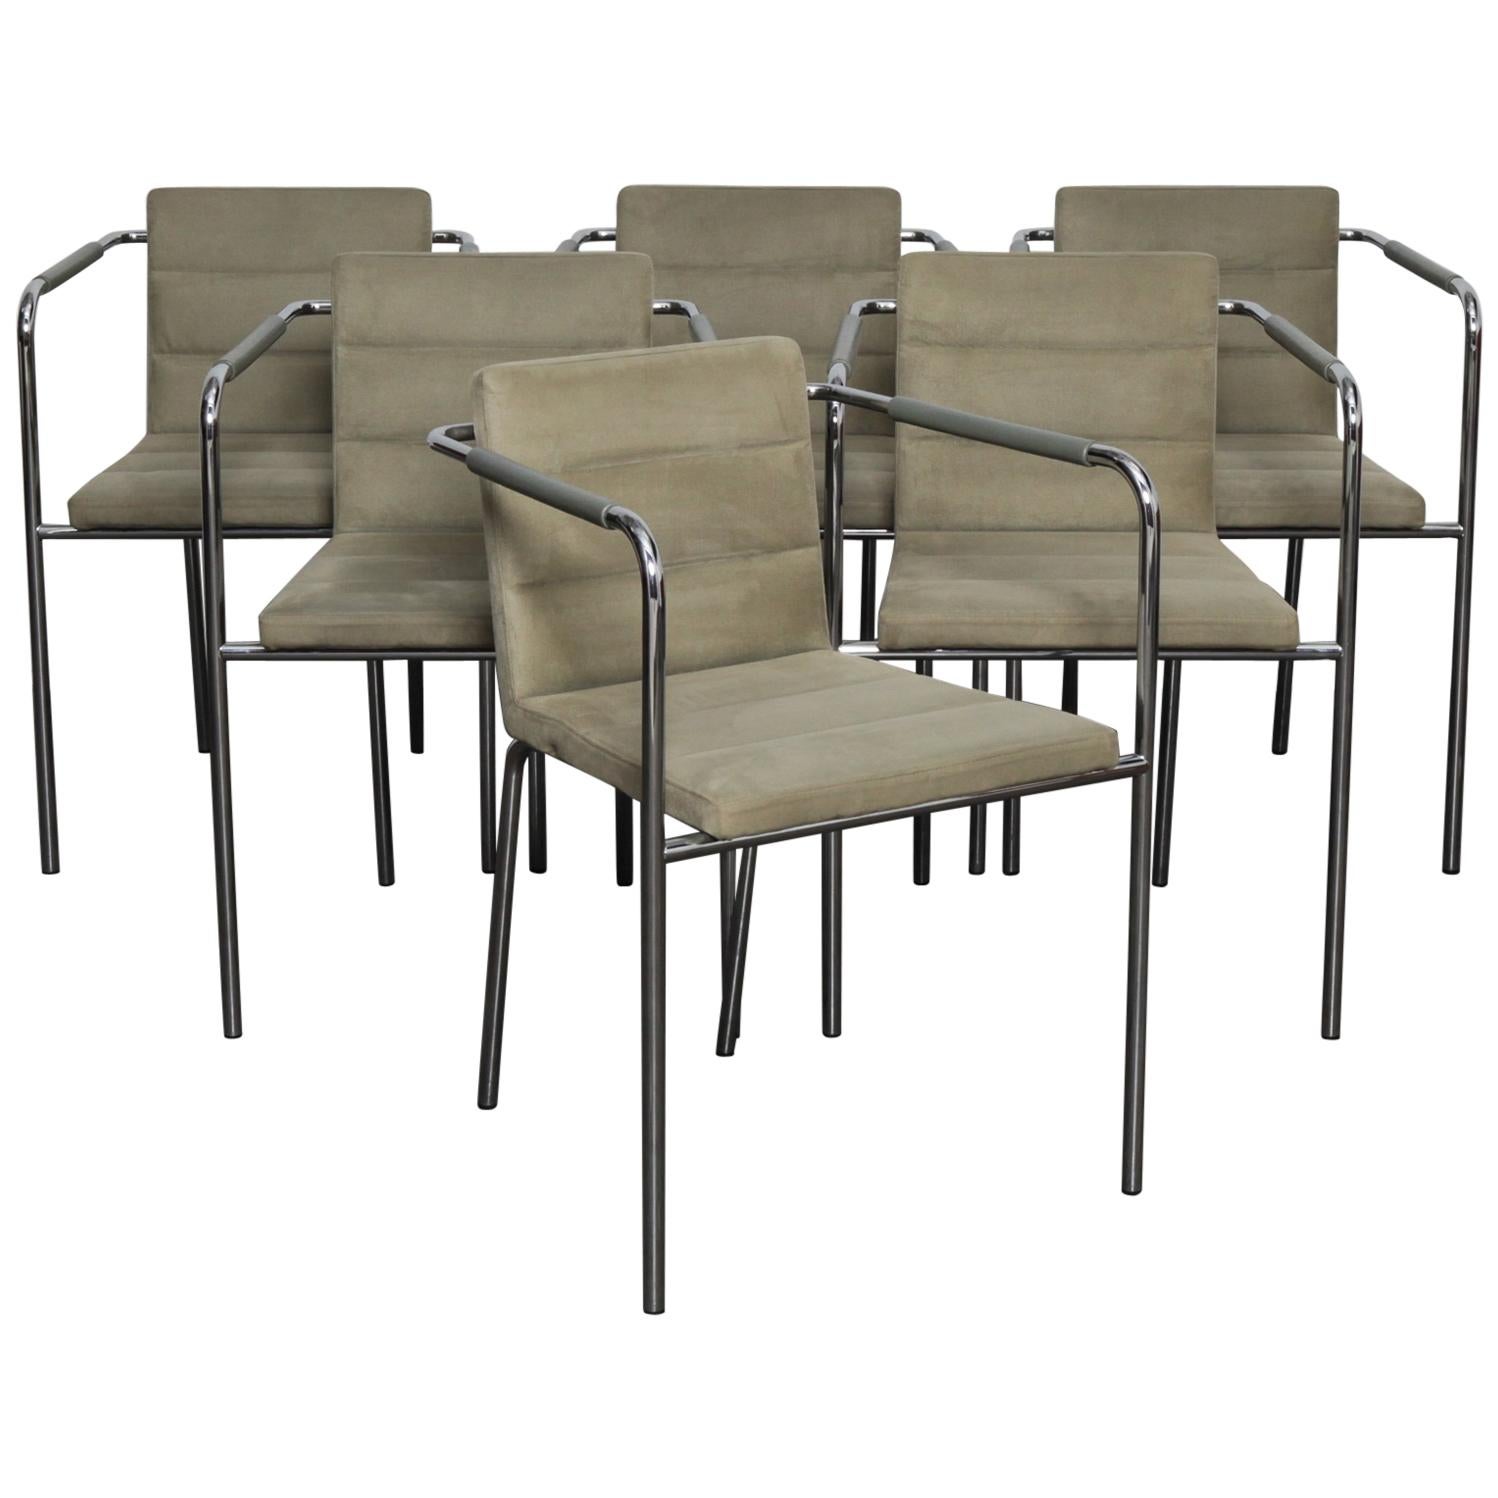 Set of 6 Metal and Original Ultra Suede Dining Chairs by Gunilla Allard for Lamm